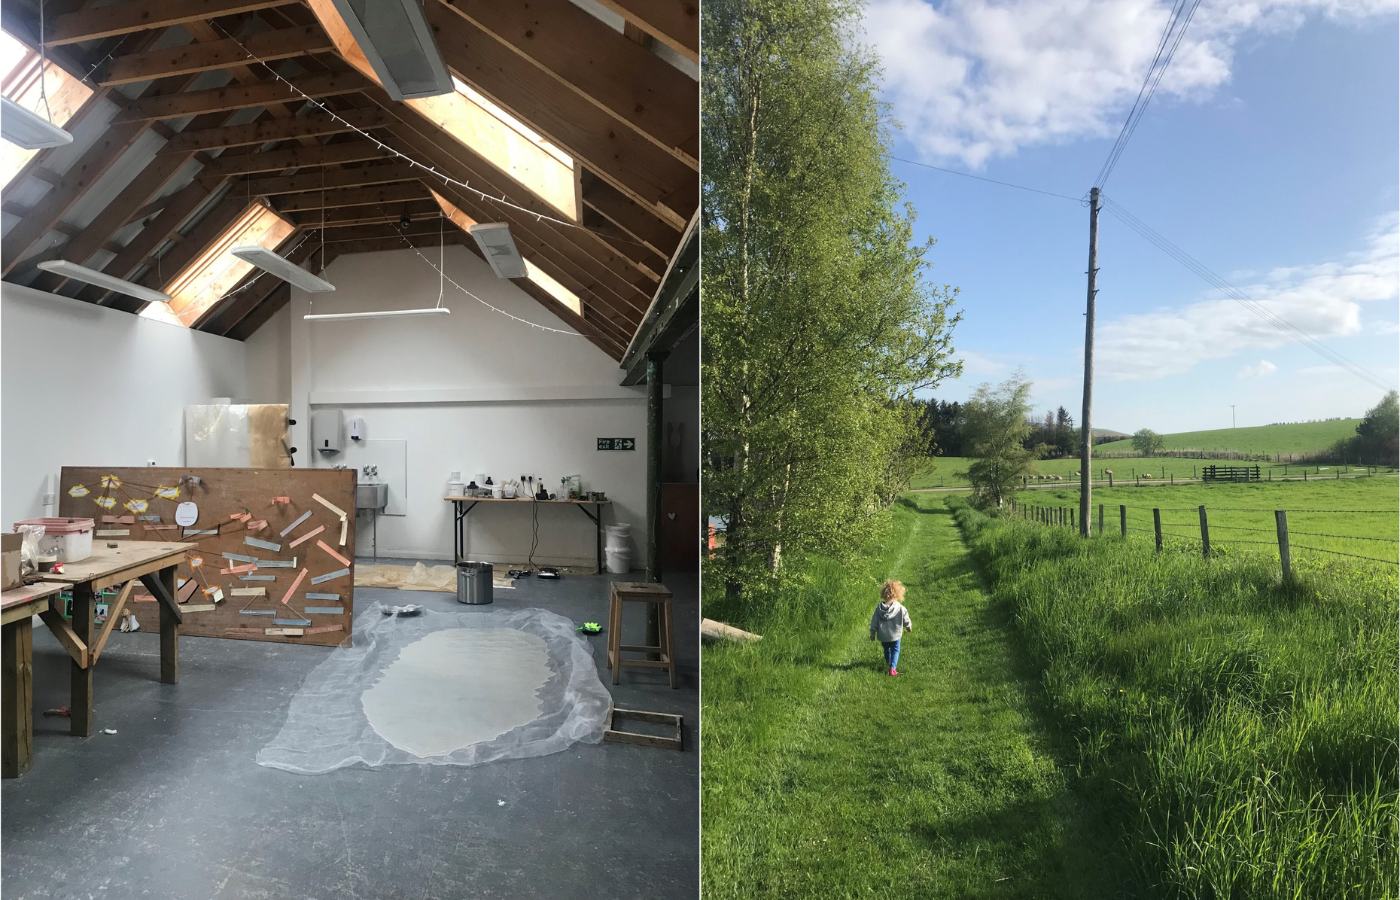 Image on left shows clay on the floor in a sculpture studio, image on the right shows a small child walking through a grassy area of countryside